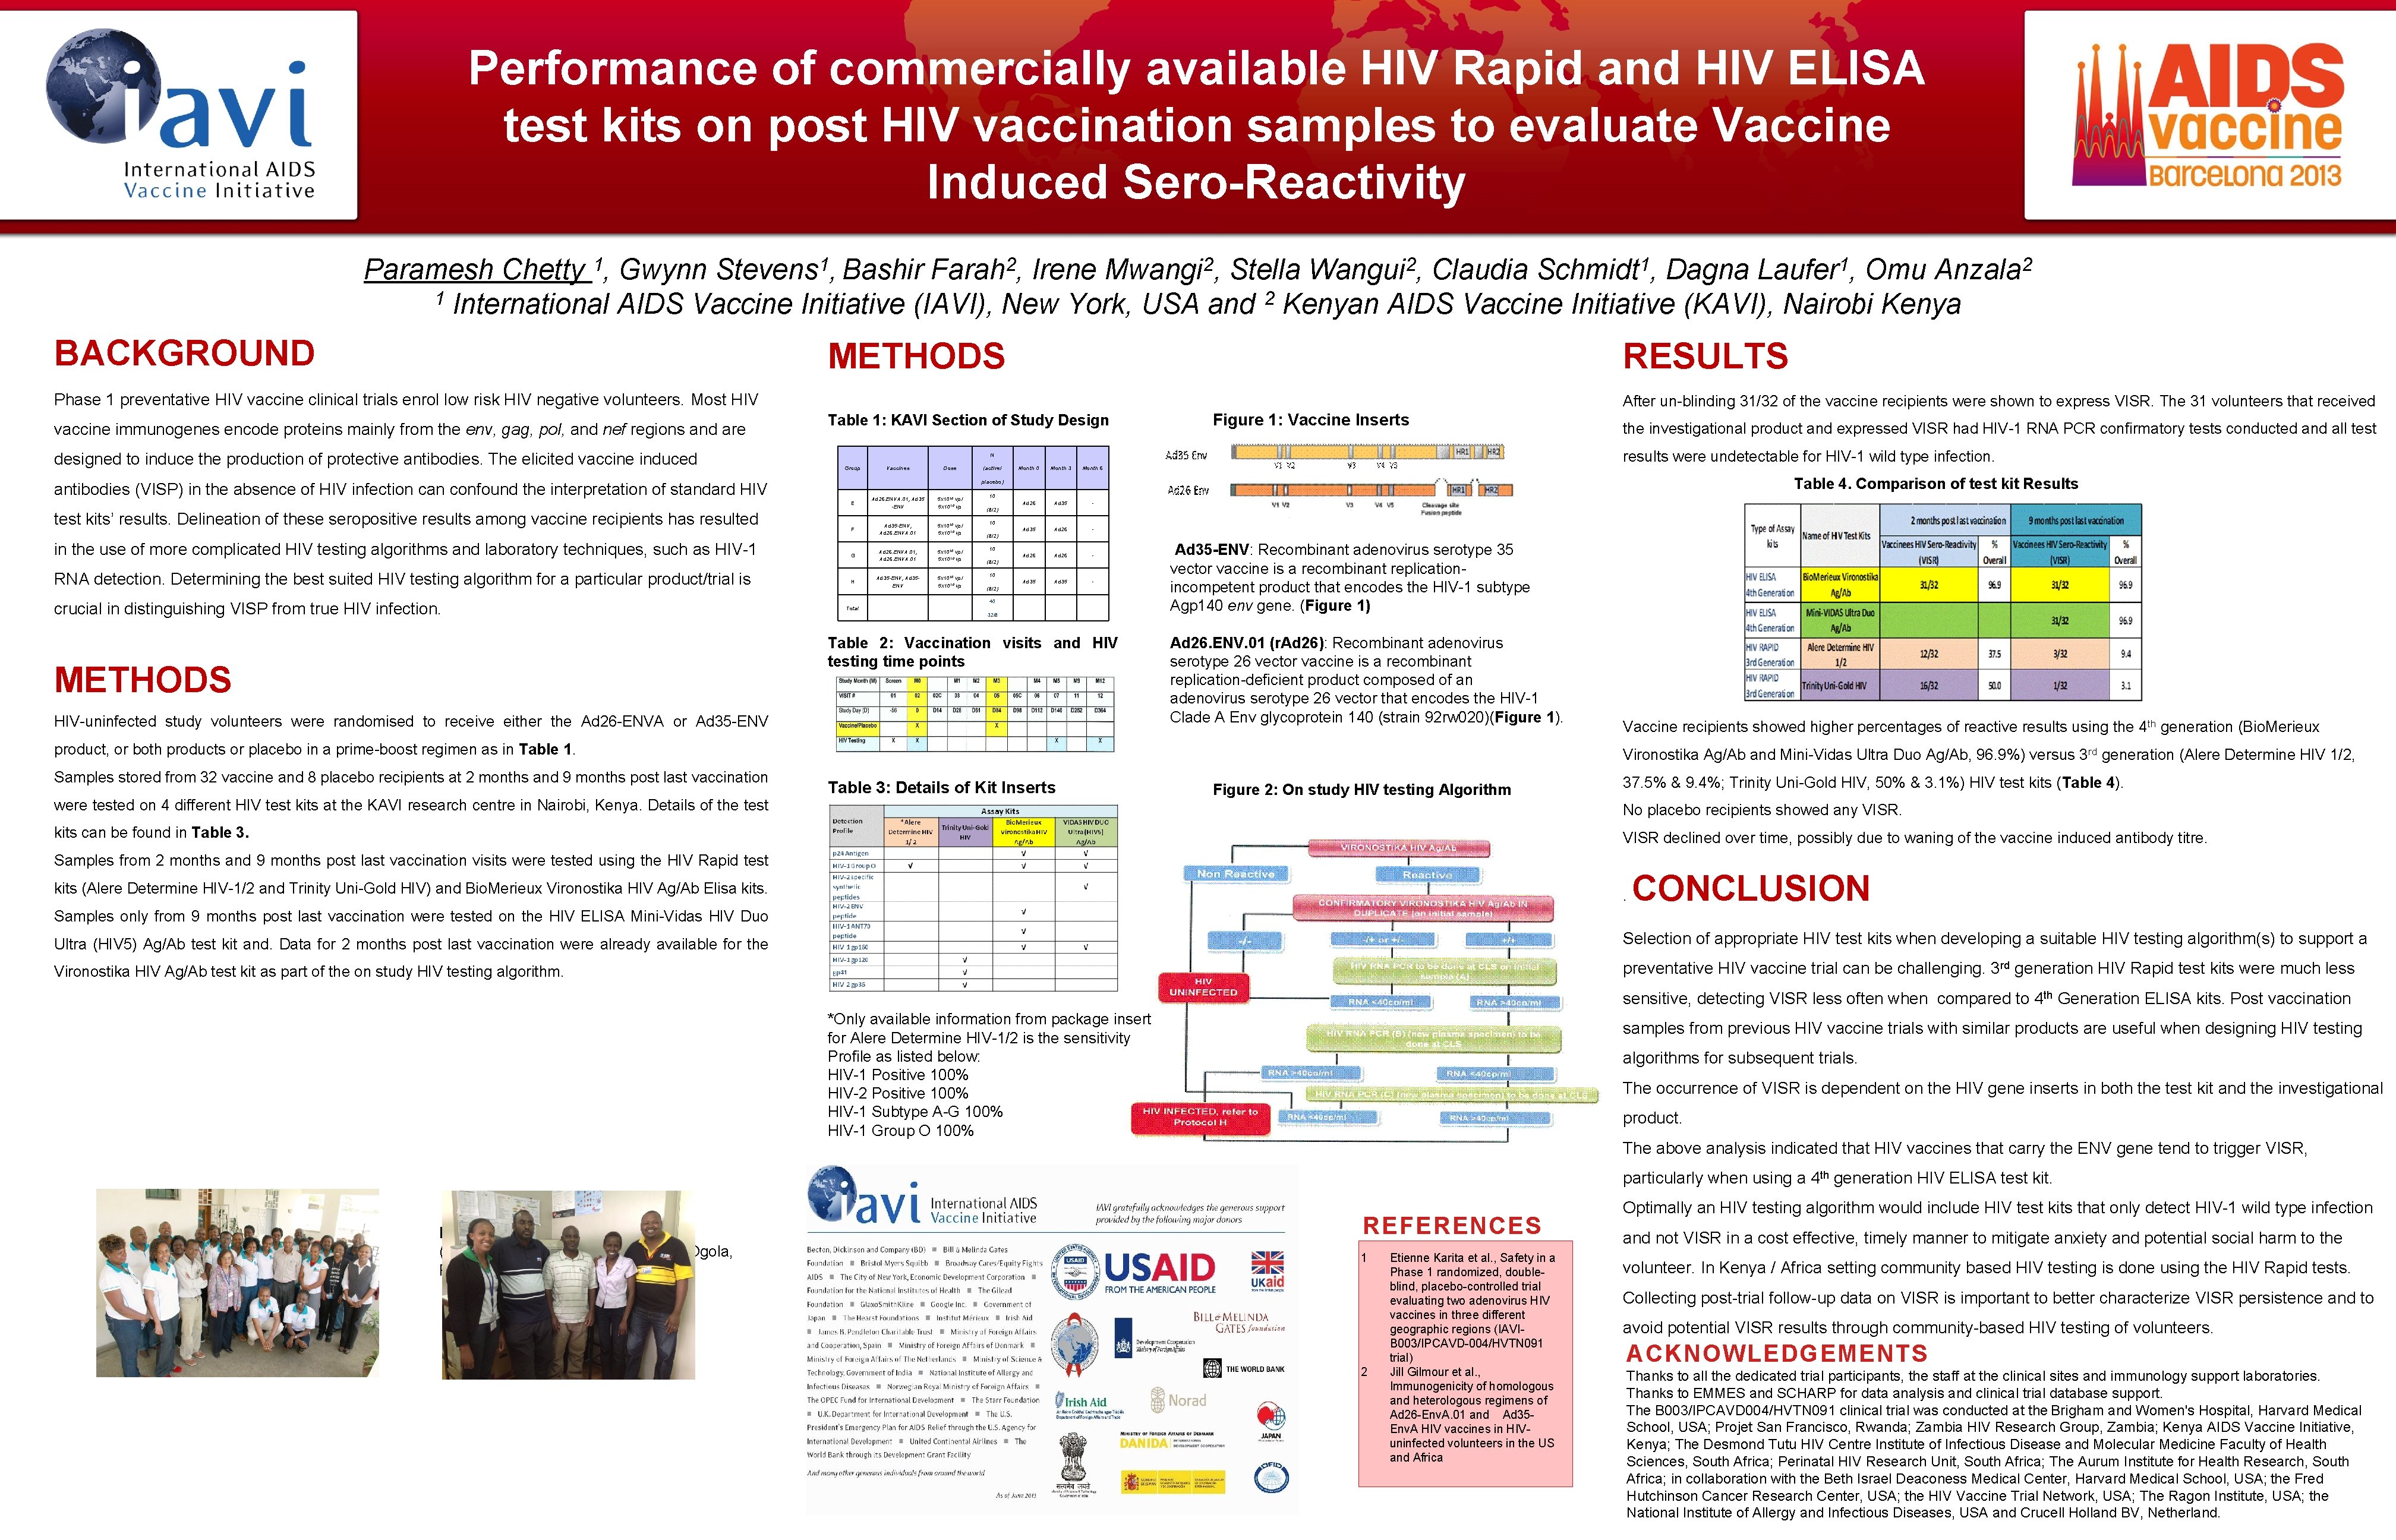 Performance of commercially available HIV Rapid and HIV ELISA test kits on post HIV